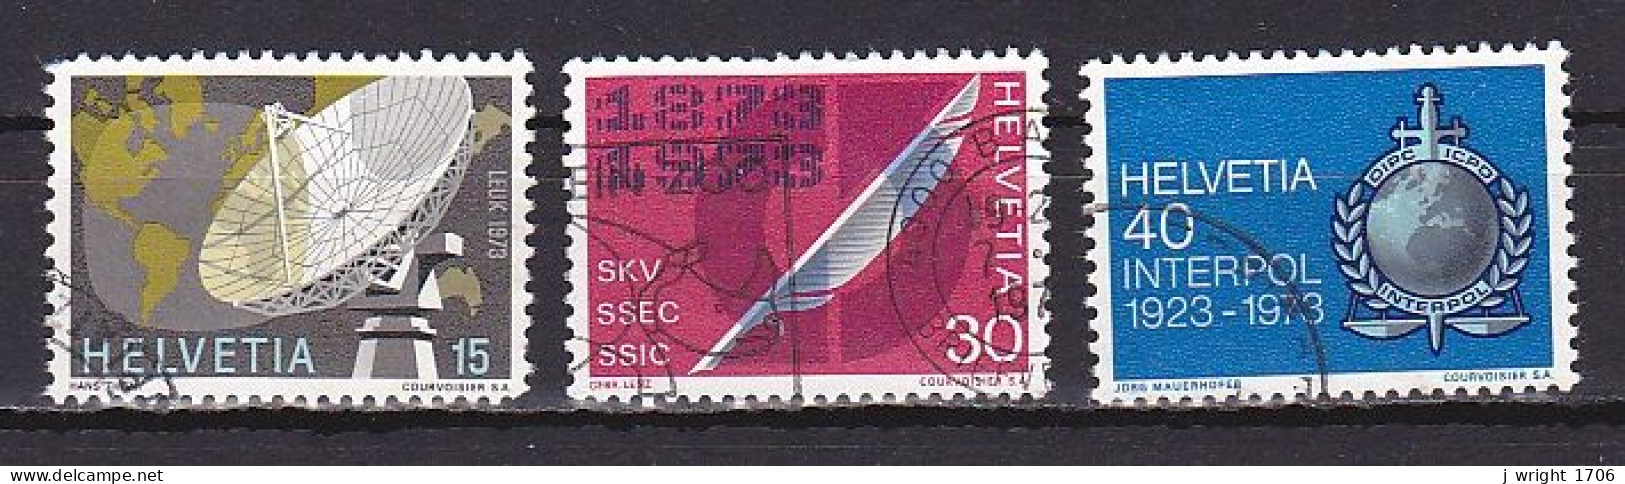 Switzerland, 1973, Publicity Issue, Set, USED - Used Stamps